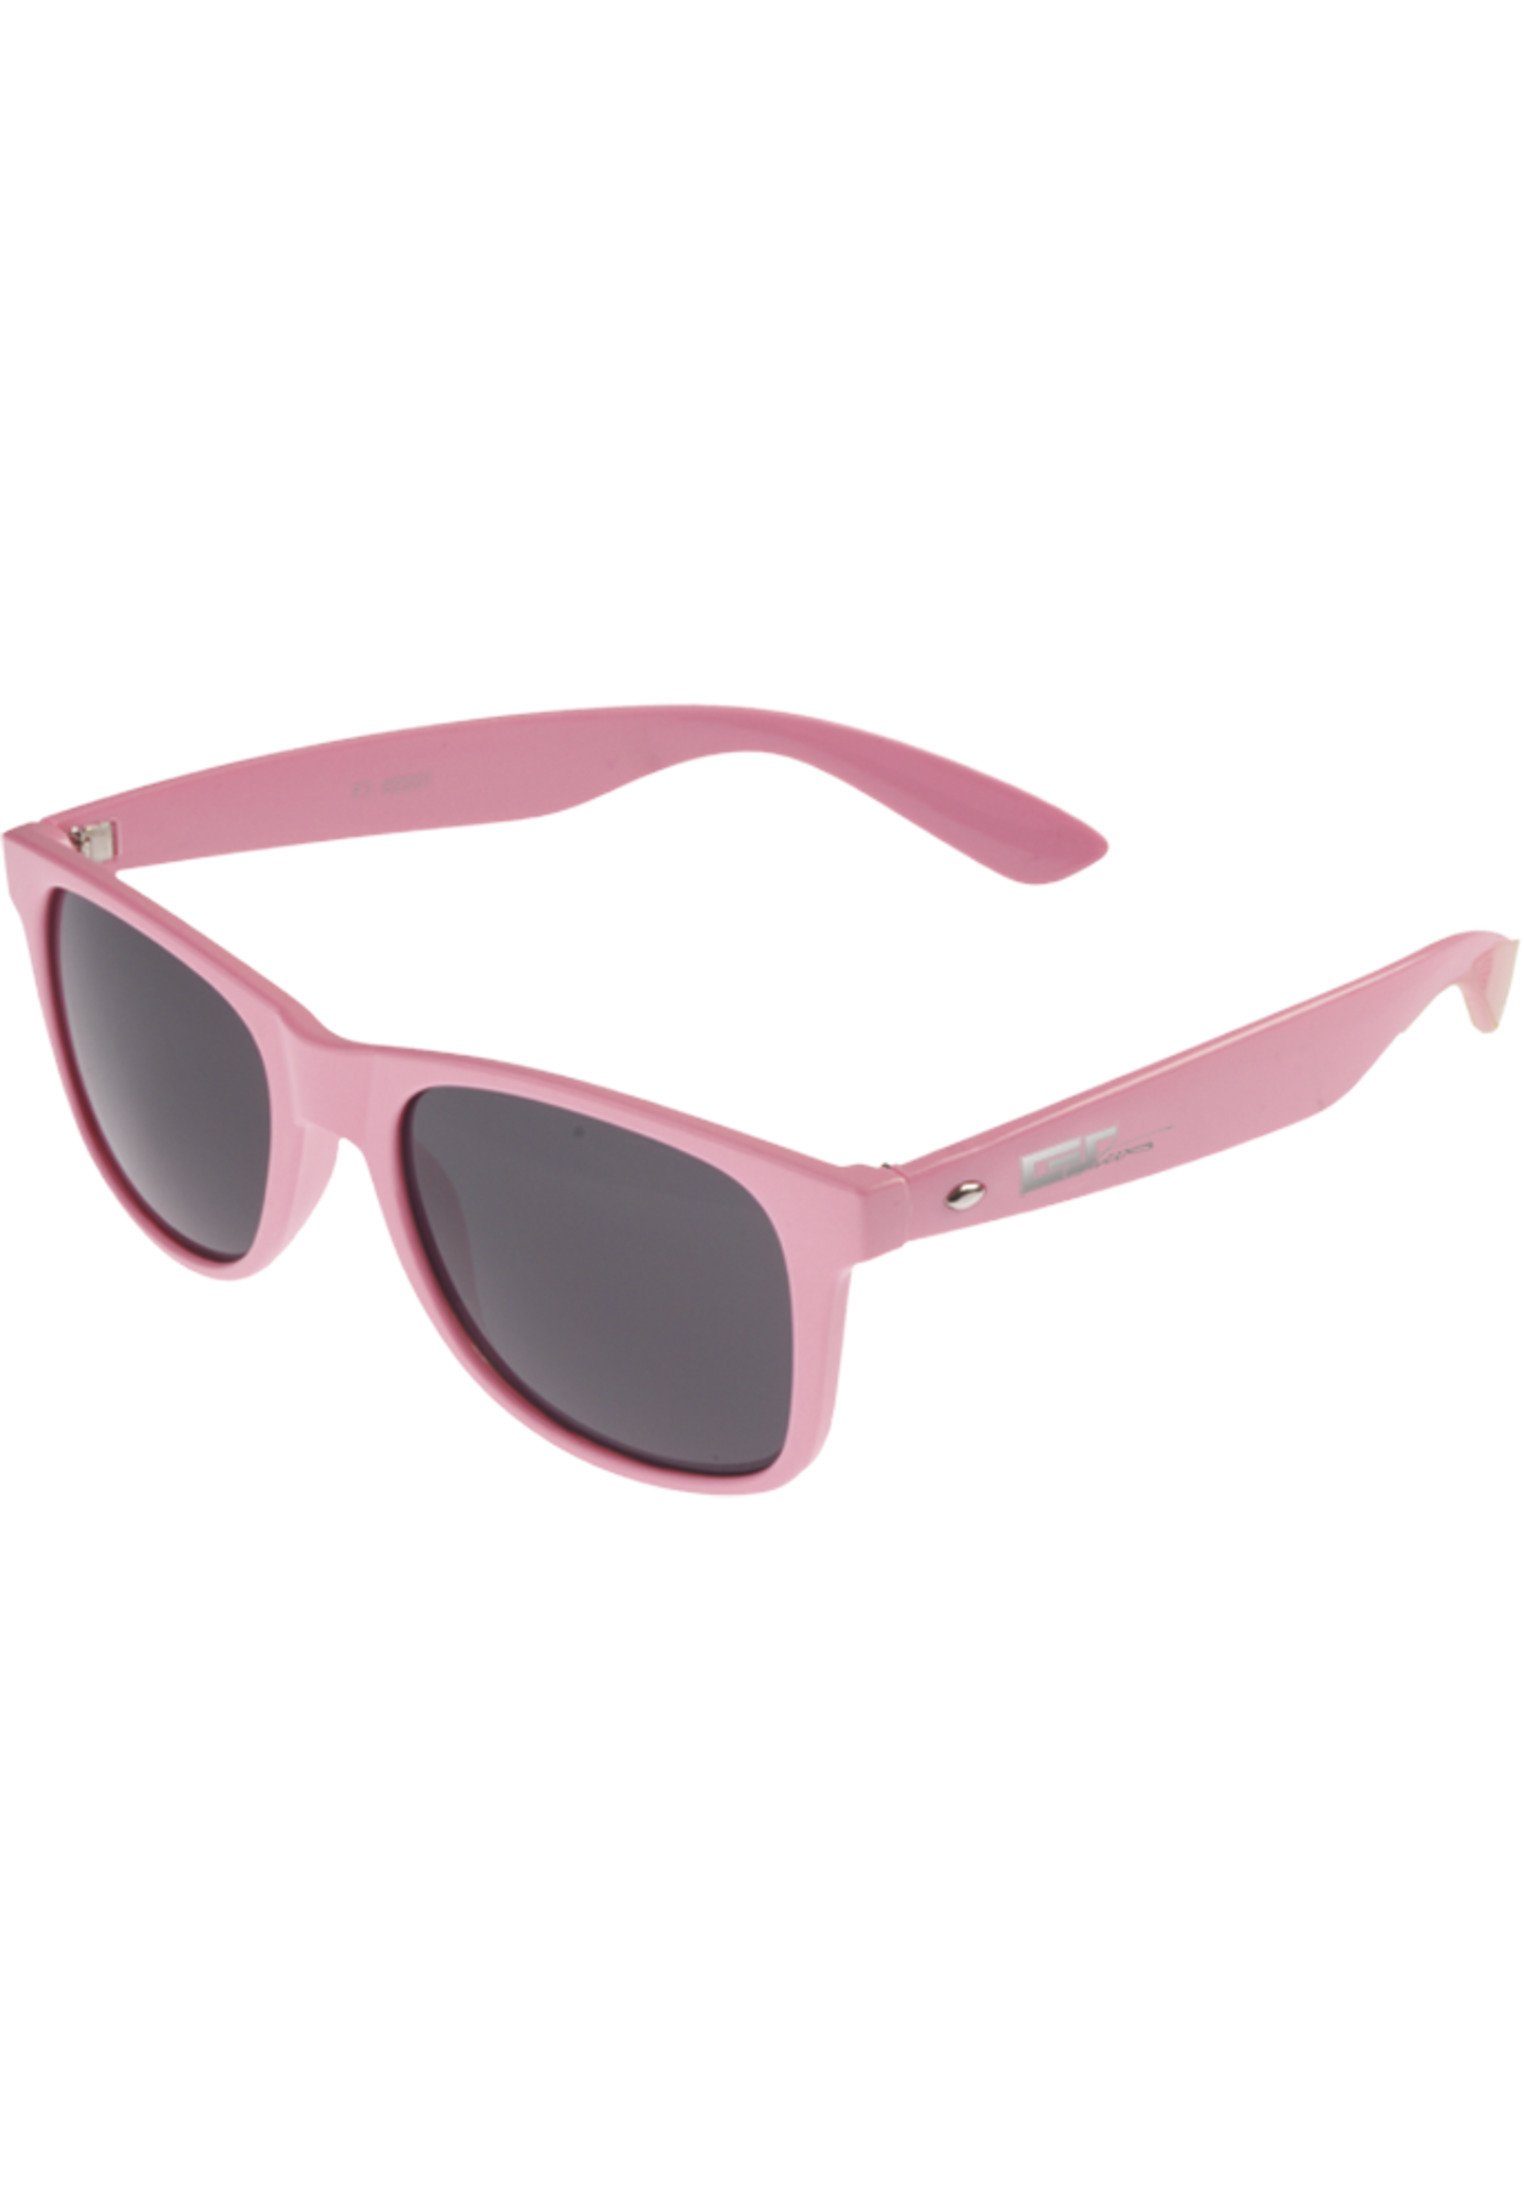 MSTRDS Sonnenbrille Accessoires Groove Shades GStwo neonpink